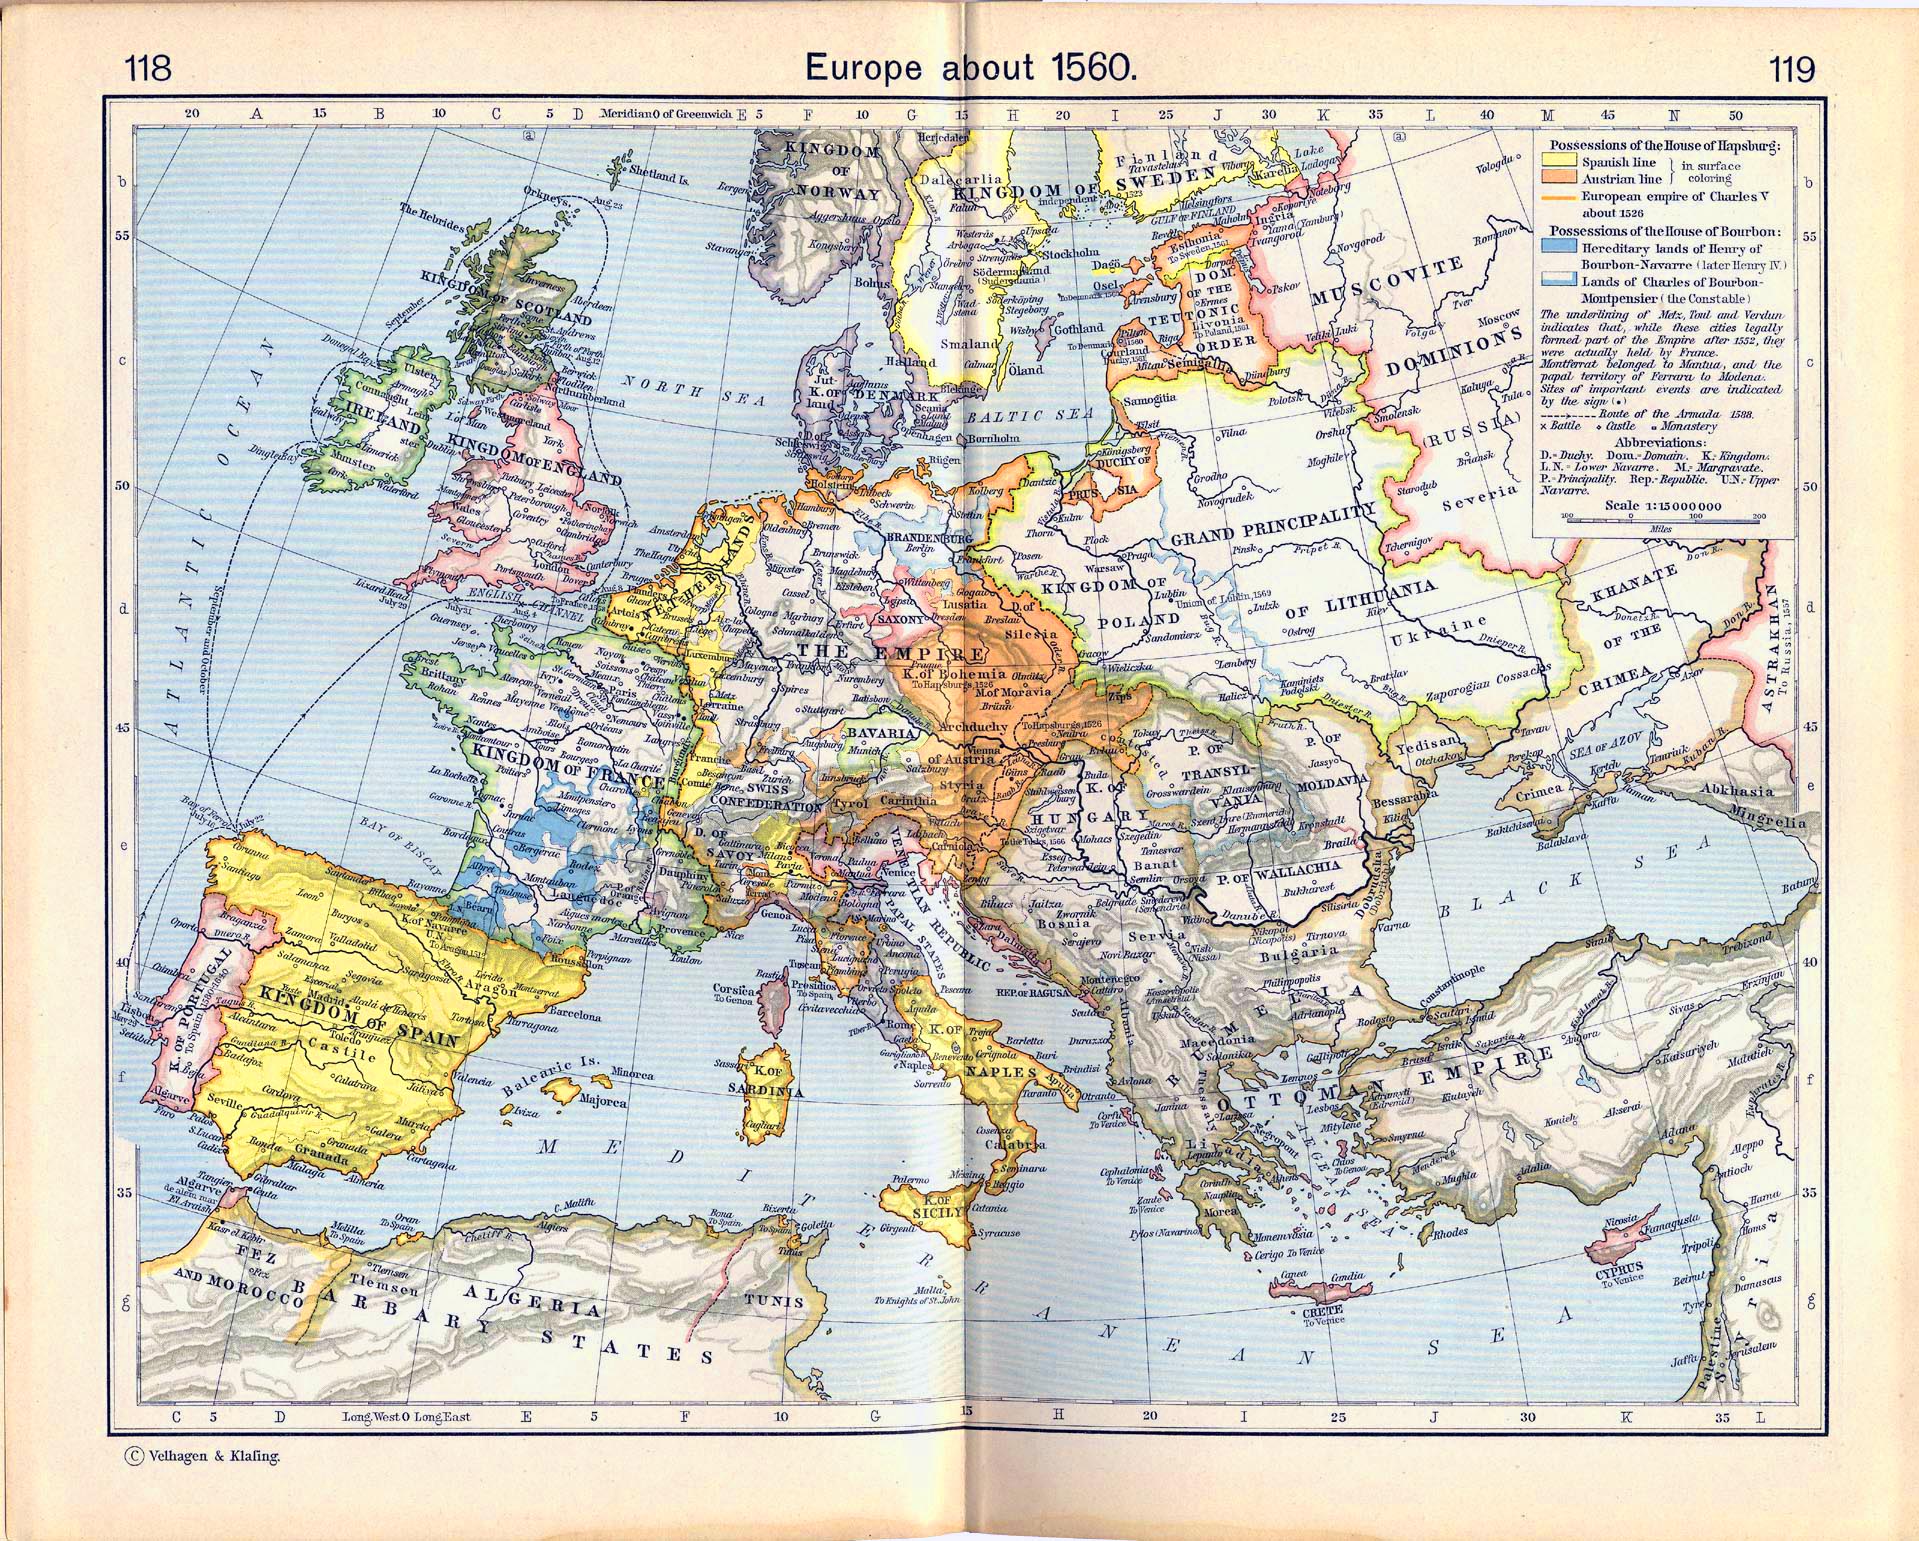 Map of Europe about 1560